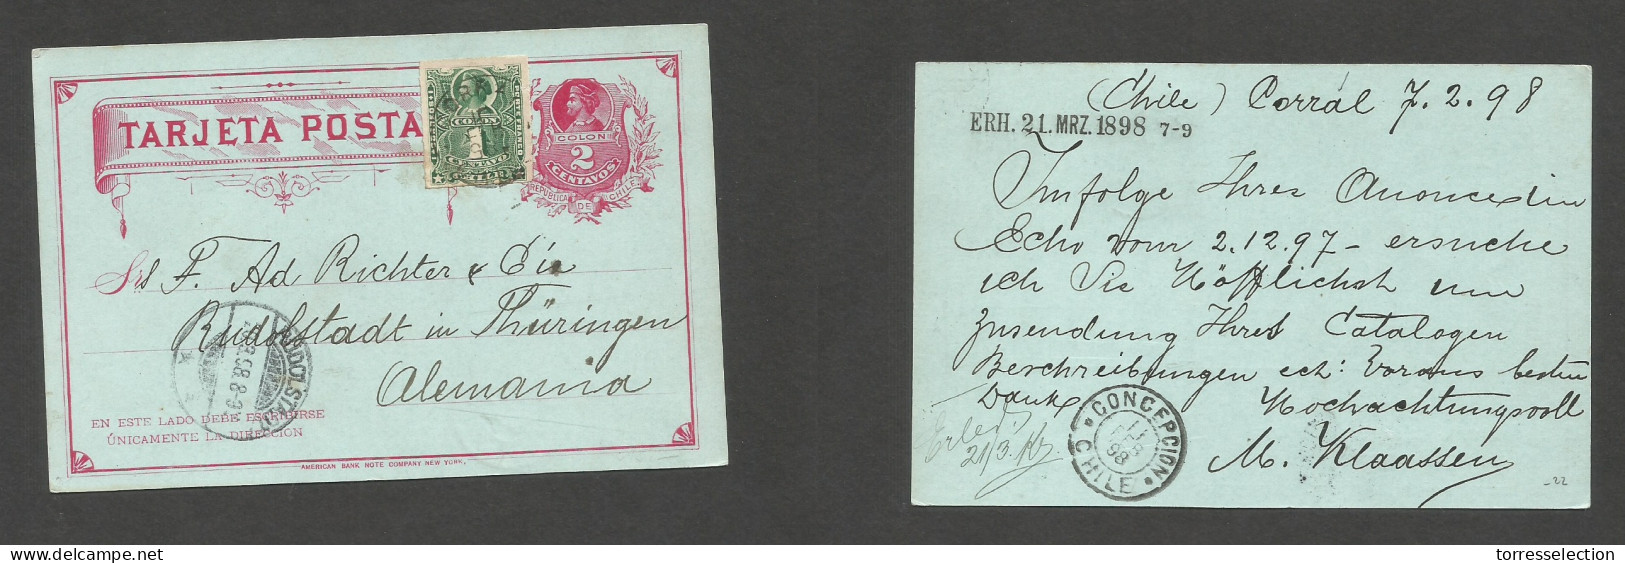 CHILE - Stationery. 1898 (7 Febr) Corral - Germany, Rudolfstadt (20 March) 2c Red Stat Card + 1c Green Perce, Tied Cds. - Chile